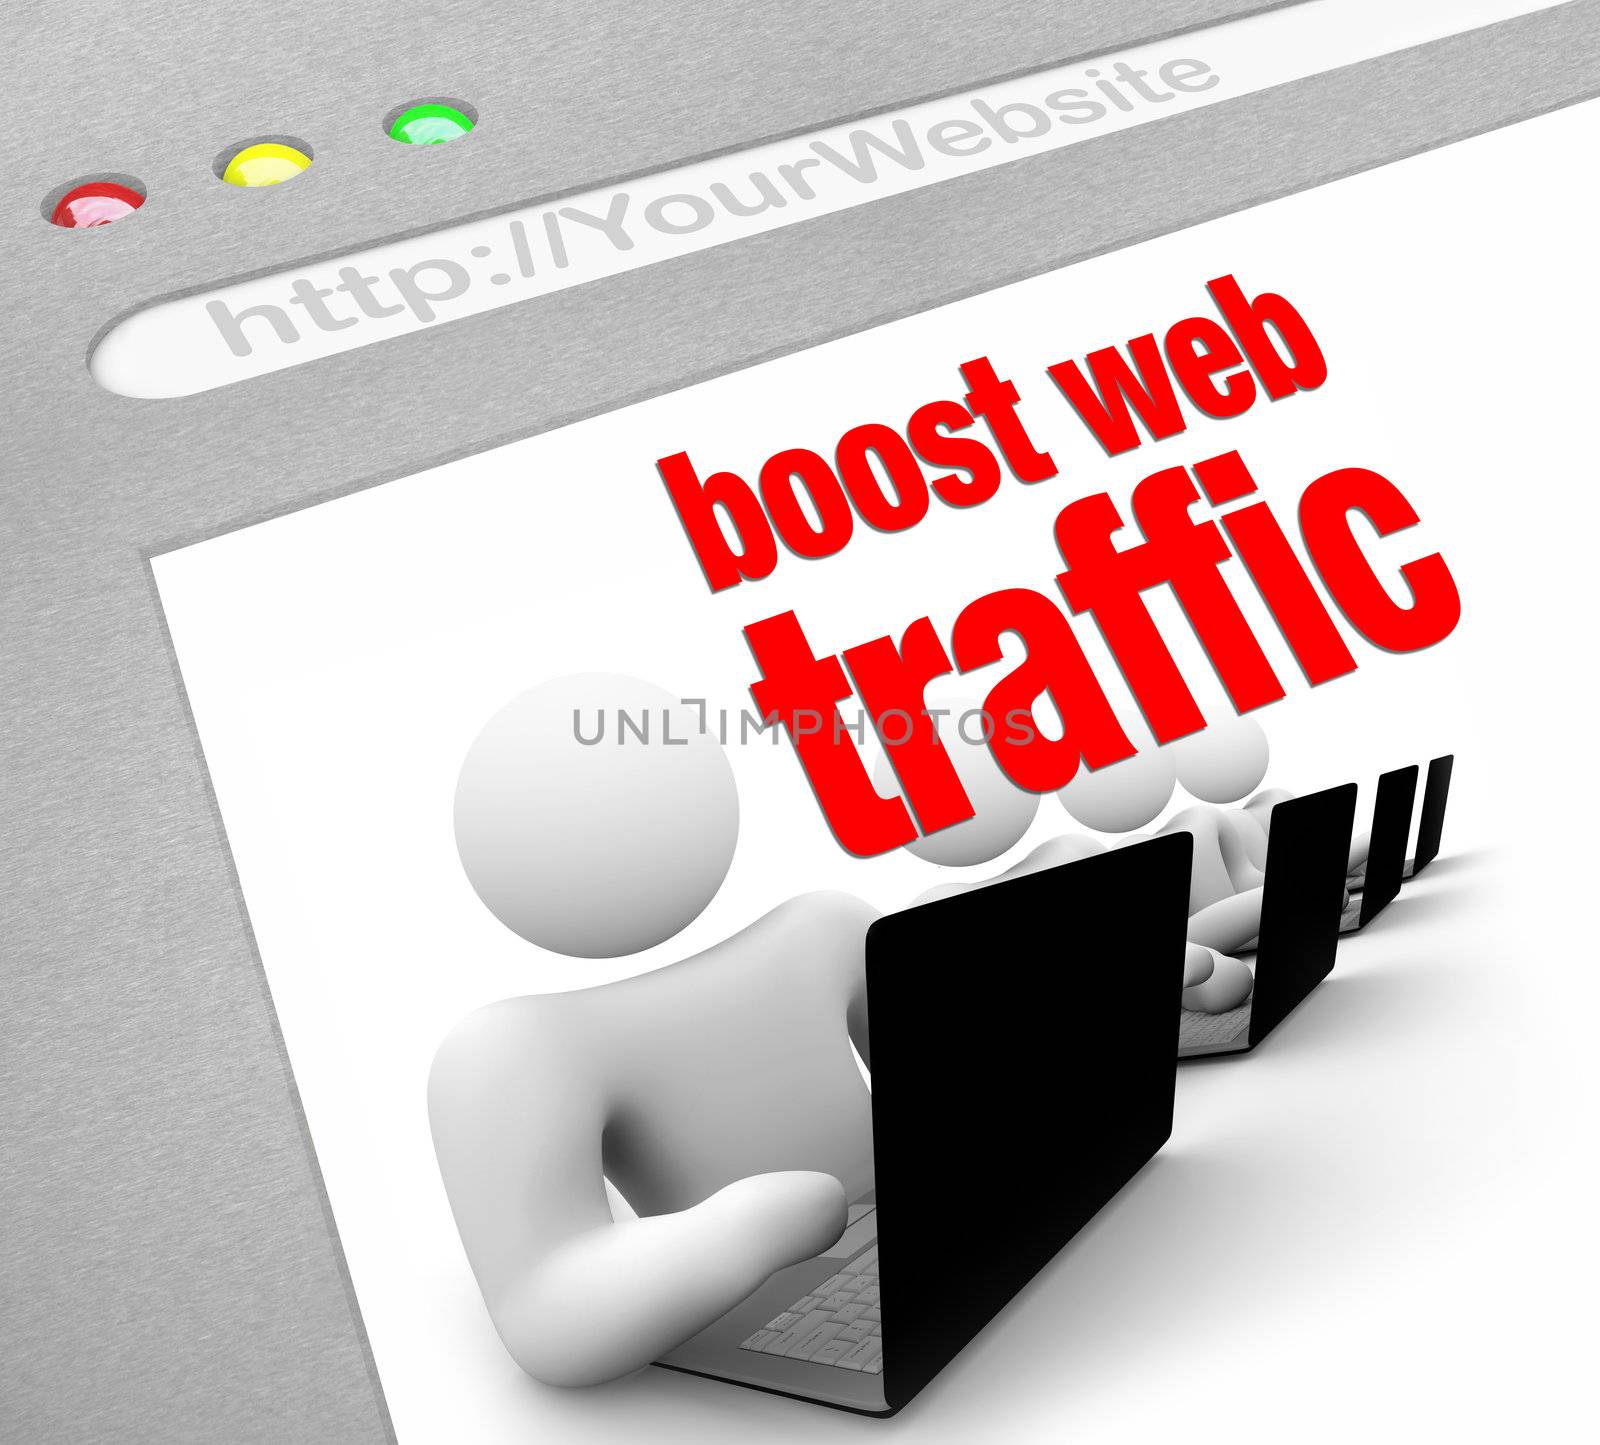 A web browser window shows the words Boost Web Traffic and several people working on laptop computers